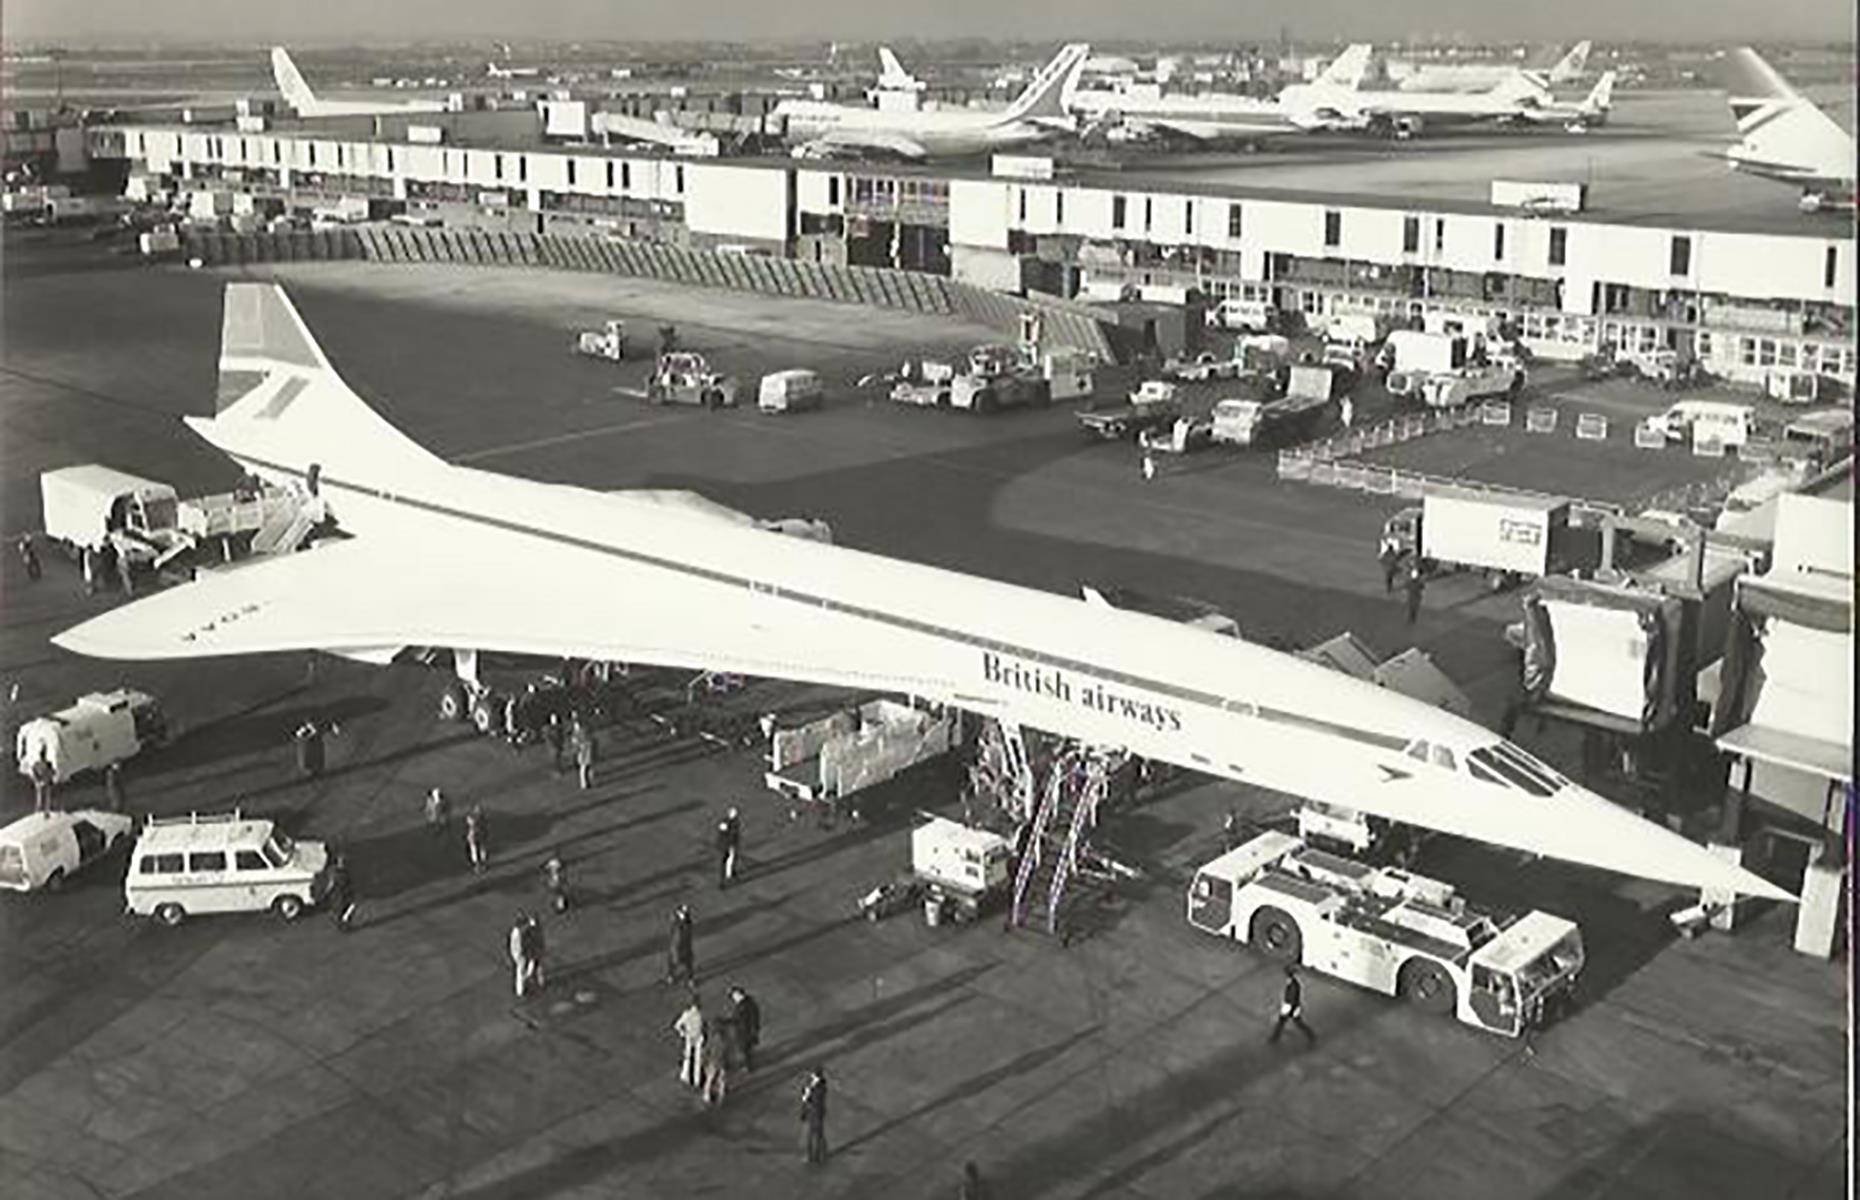 Though many airlines initially showed interest in Concorde, numerous orders were dropped after concerns were raised as to the aircraft's noise, environmental impact and economic potential. In the end, only Air France and BOAC would operate Concorde. The airliner is pictured here at London Heathrow in 1976 as it begins service with a BOAC flight from the UK to Bahrain.